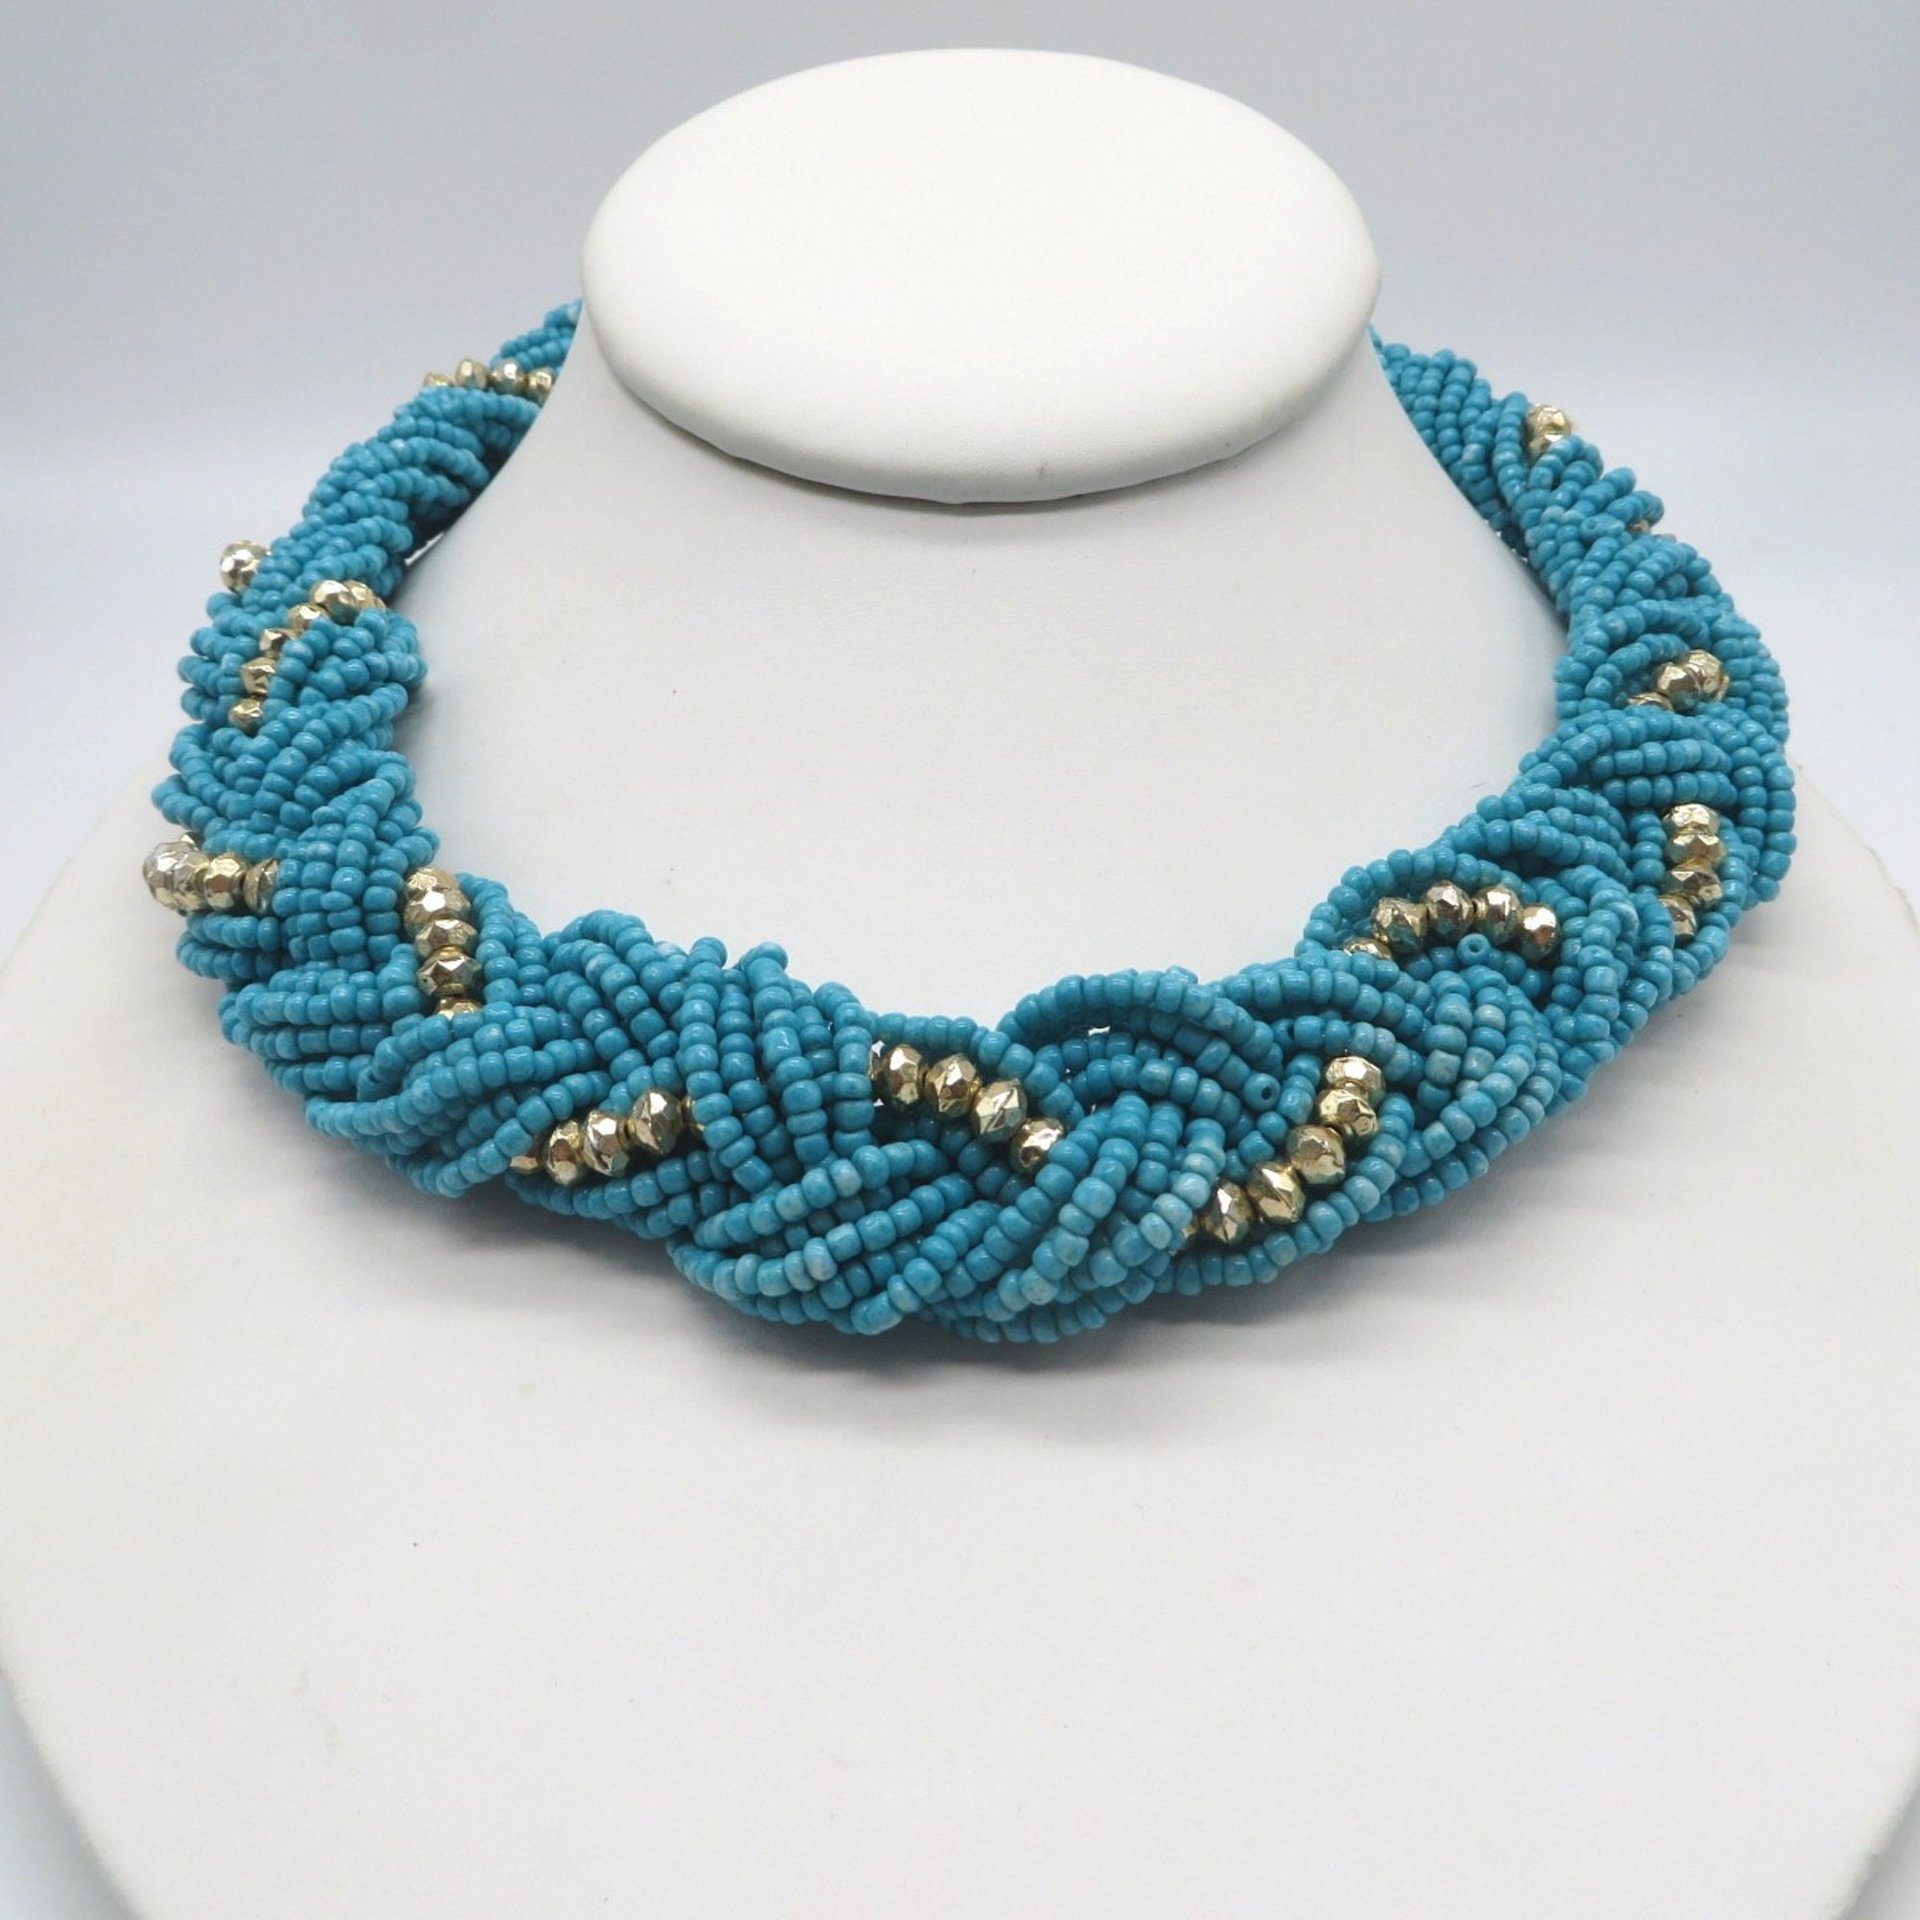 Turquoise Braided Bead Gold and Silver Tone Choker Necklace